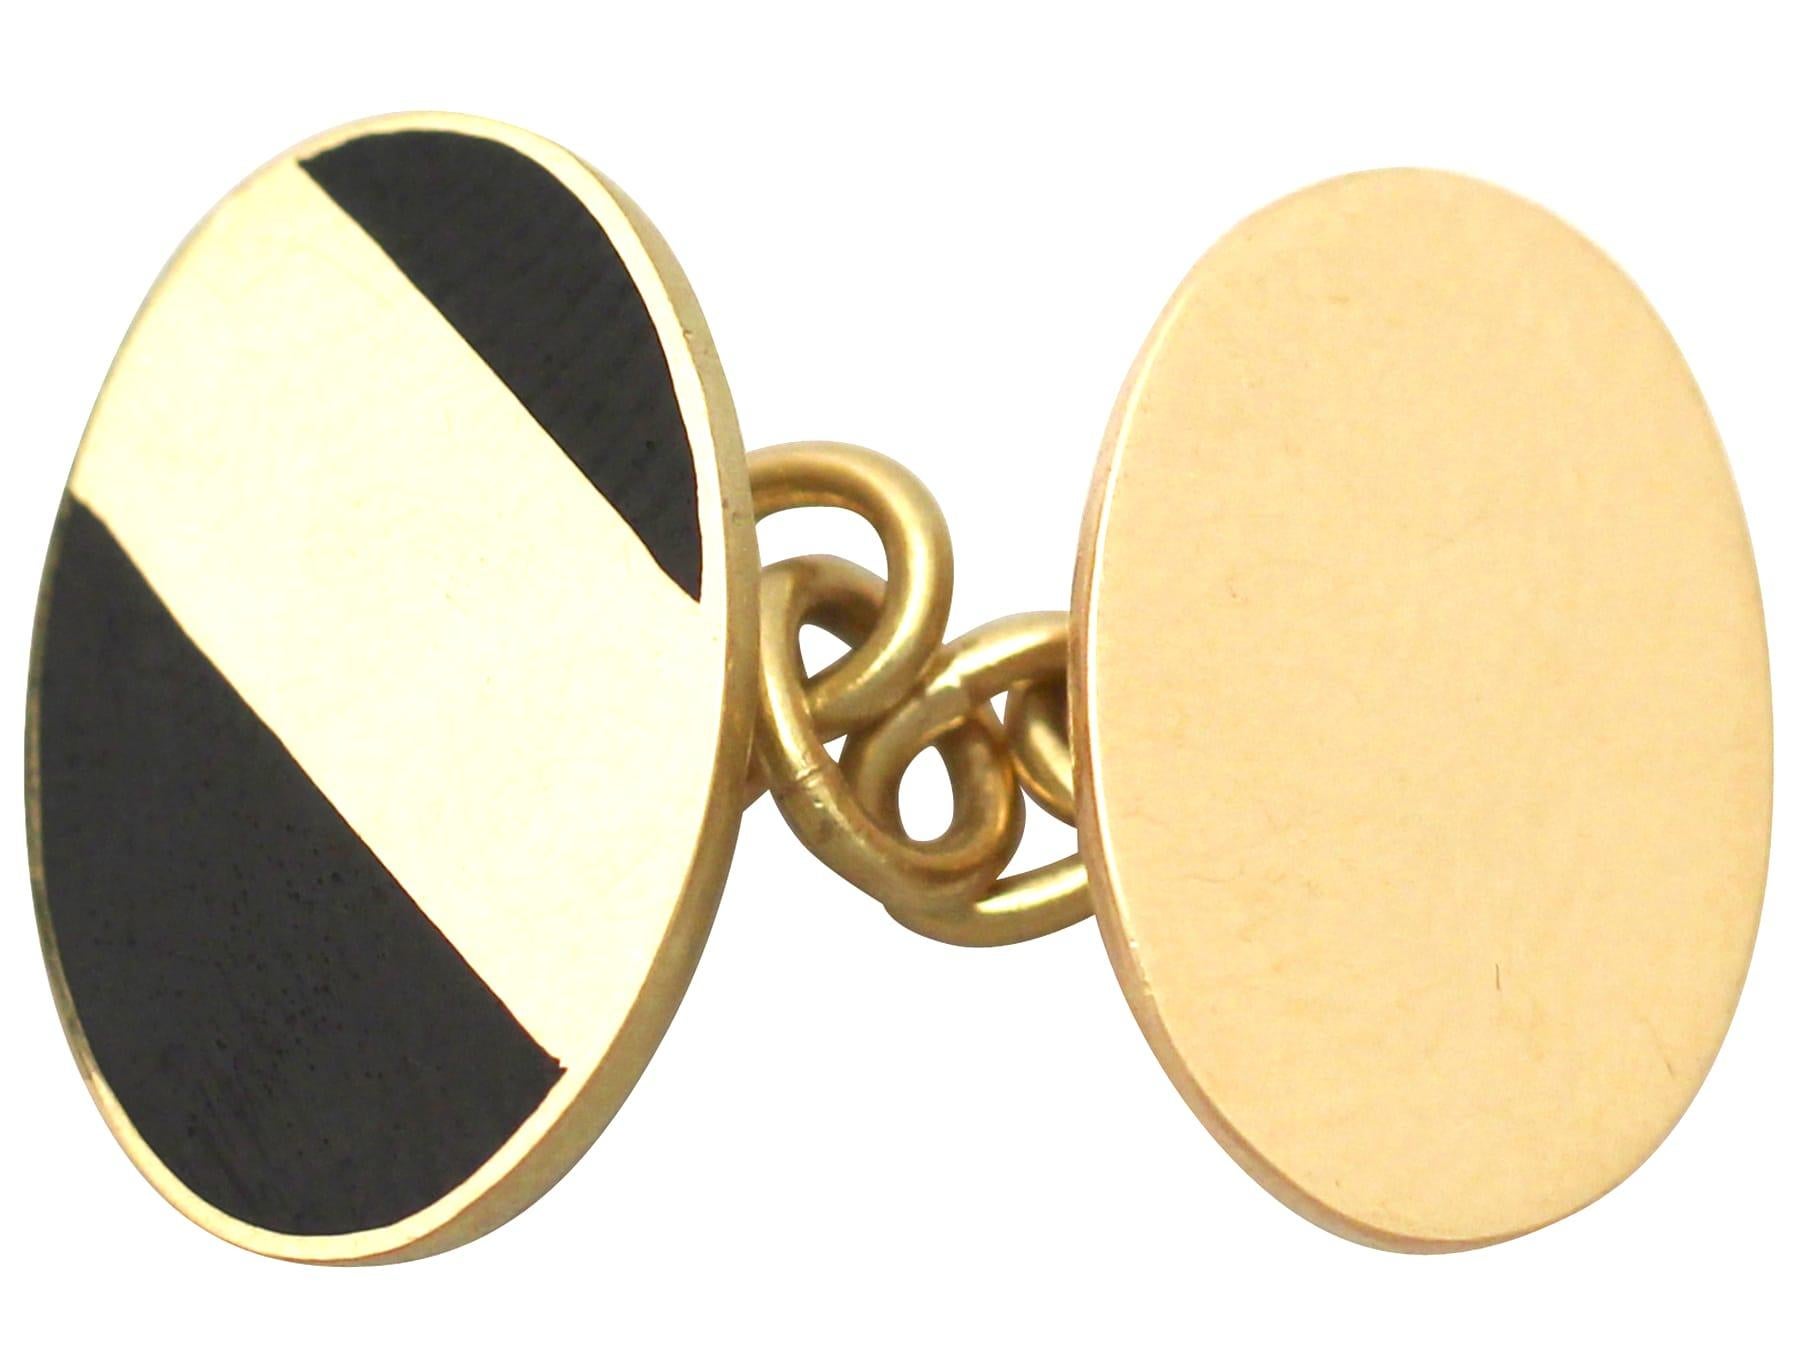 Vintage 1980s 18k Yellow Gold and Black Enamel Cufflinks In Excellent Condition For Sale In Jesmond, Newcastle Upon Tyne